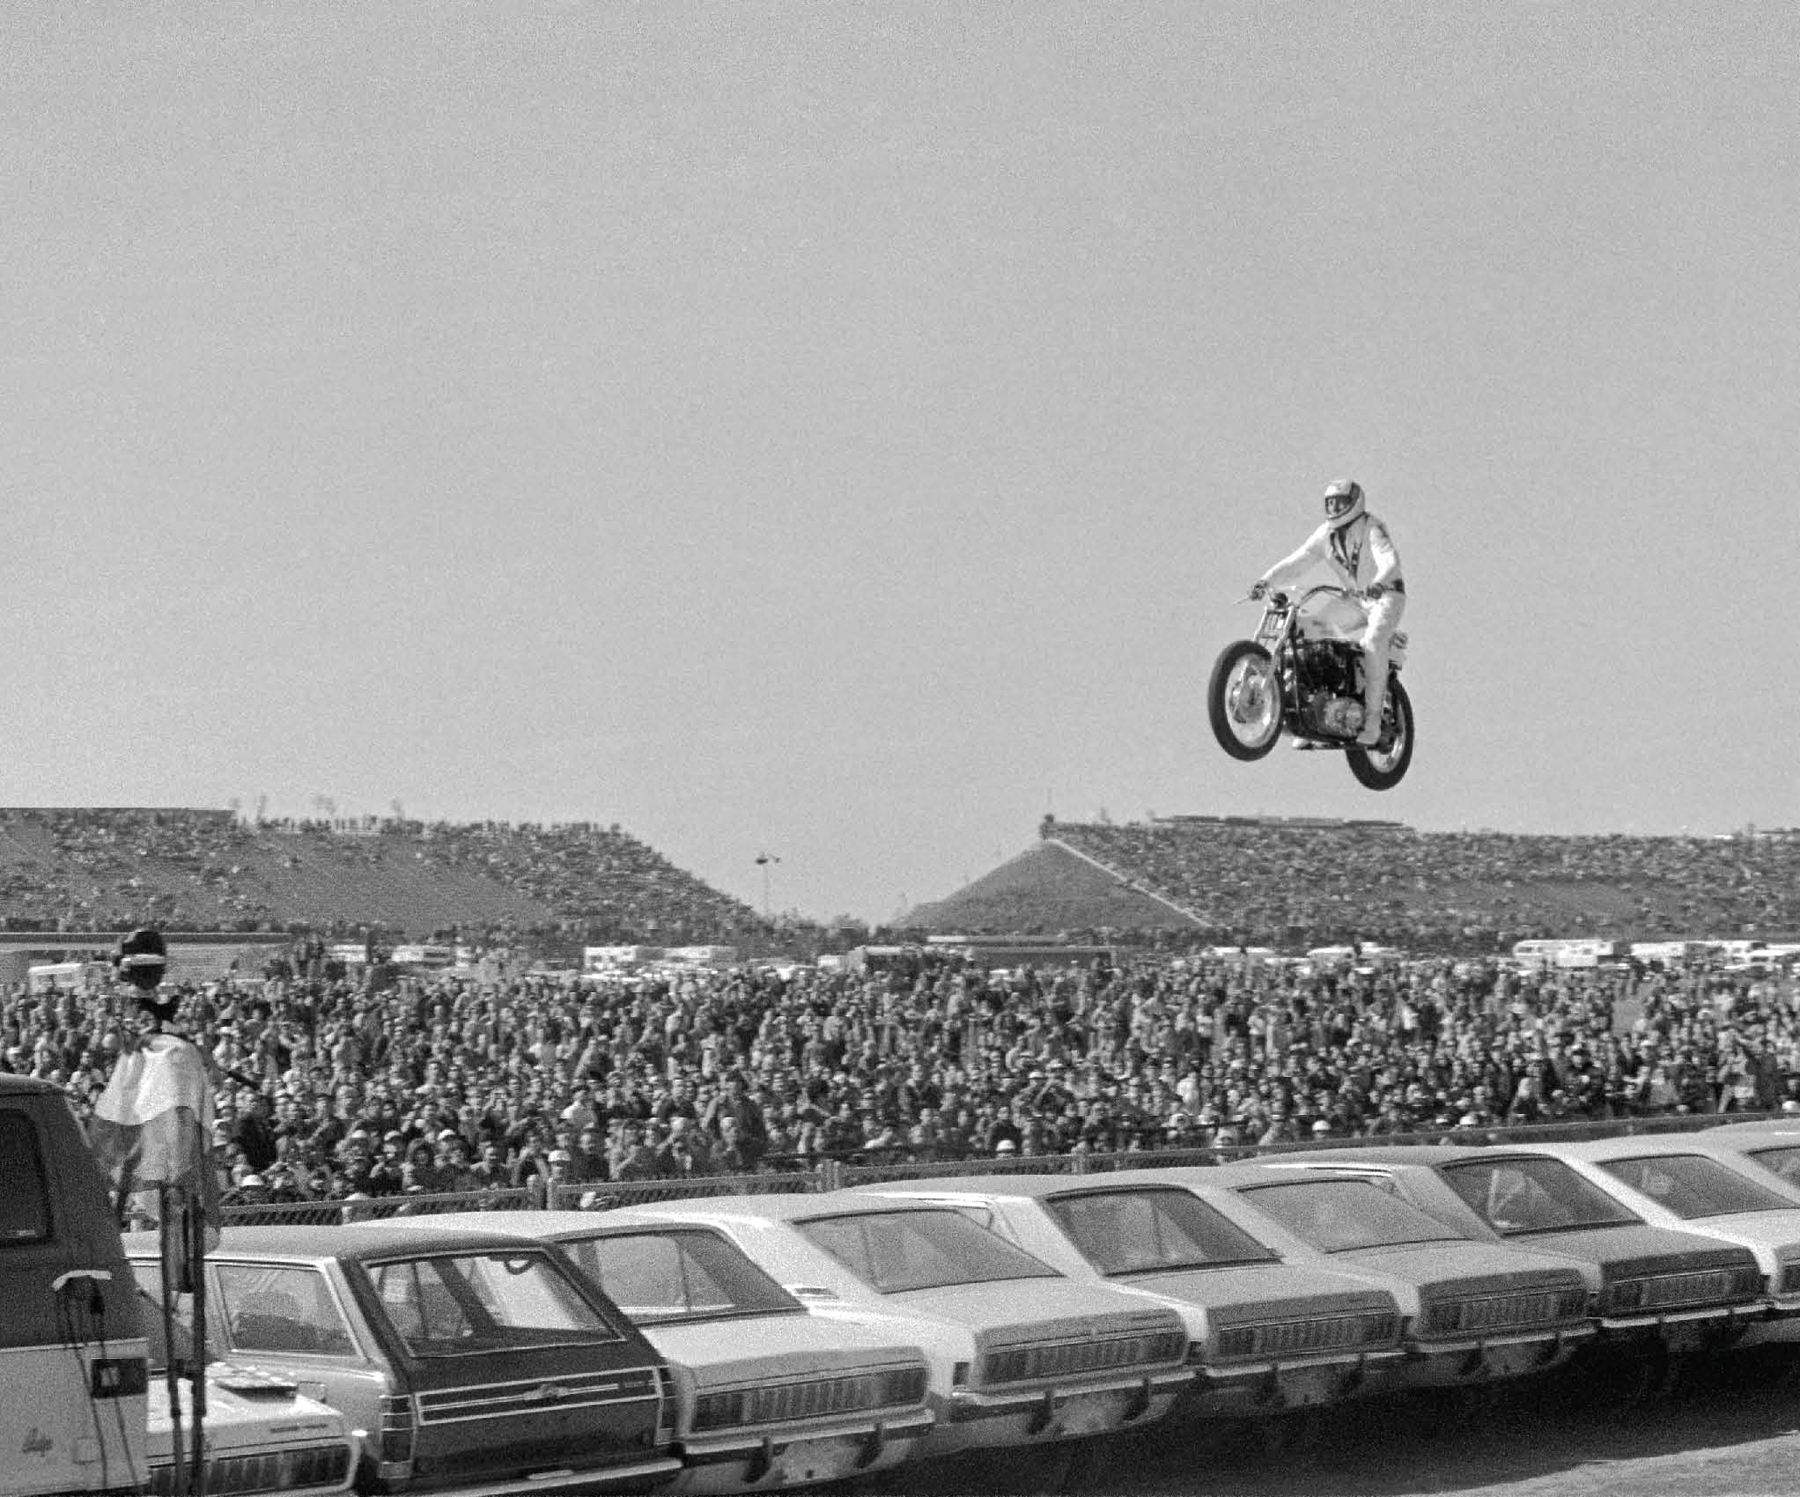 Evel Knievel successfully jumped over 19 cars on February 28 1971 at Ontario - photo 3